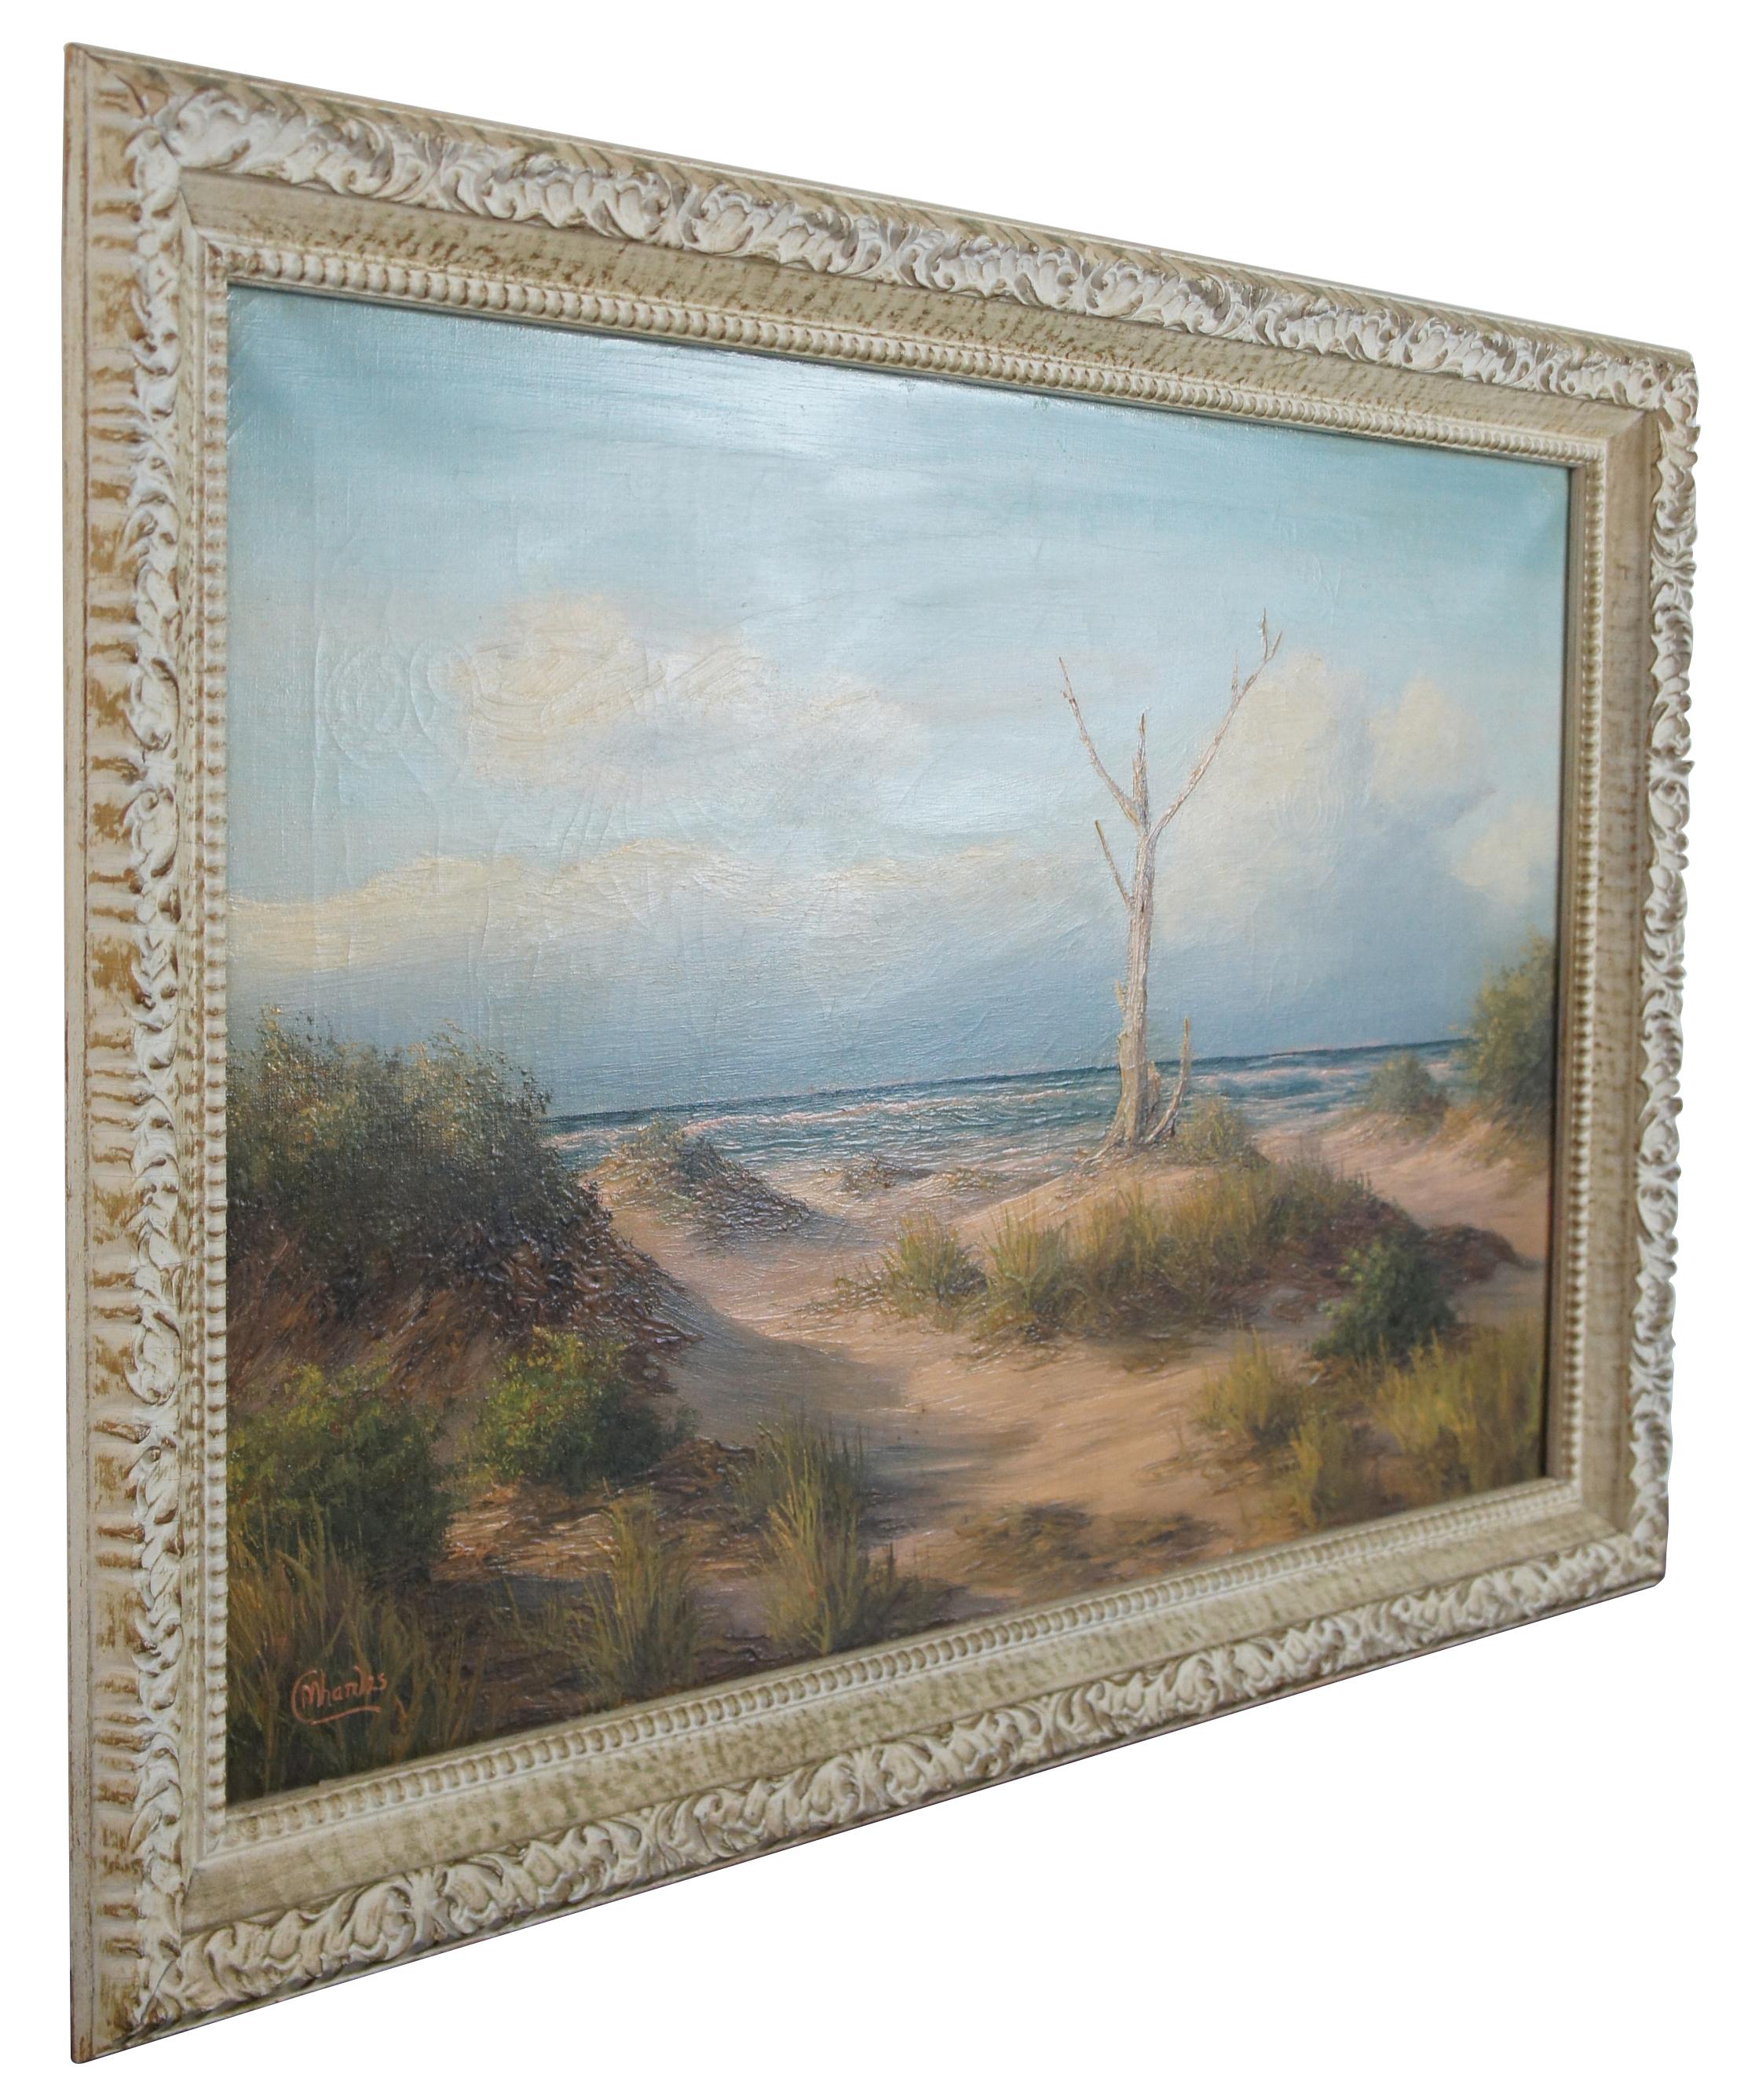 Oil on canvas landscape painting of a dead tree in the middle of sand dunes at the edge of the ocean, signed M. Charles. Donald Leary 1916-1991 painted images of the Outer Banks North Carolina under the name M Charles. He Signed his works 